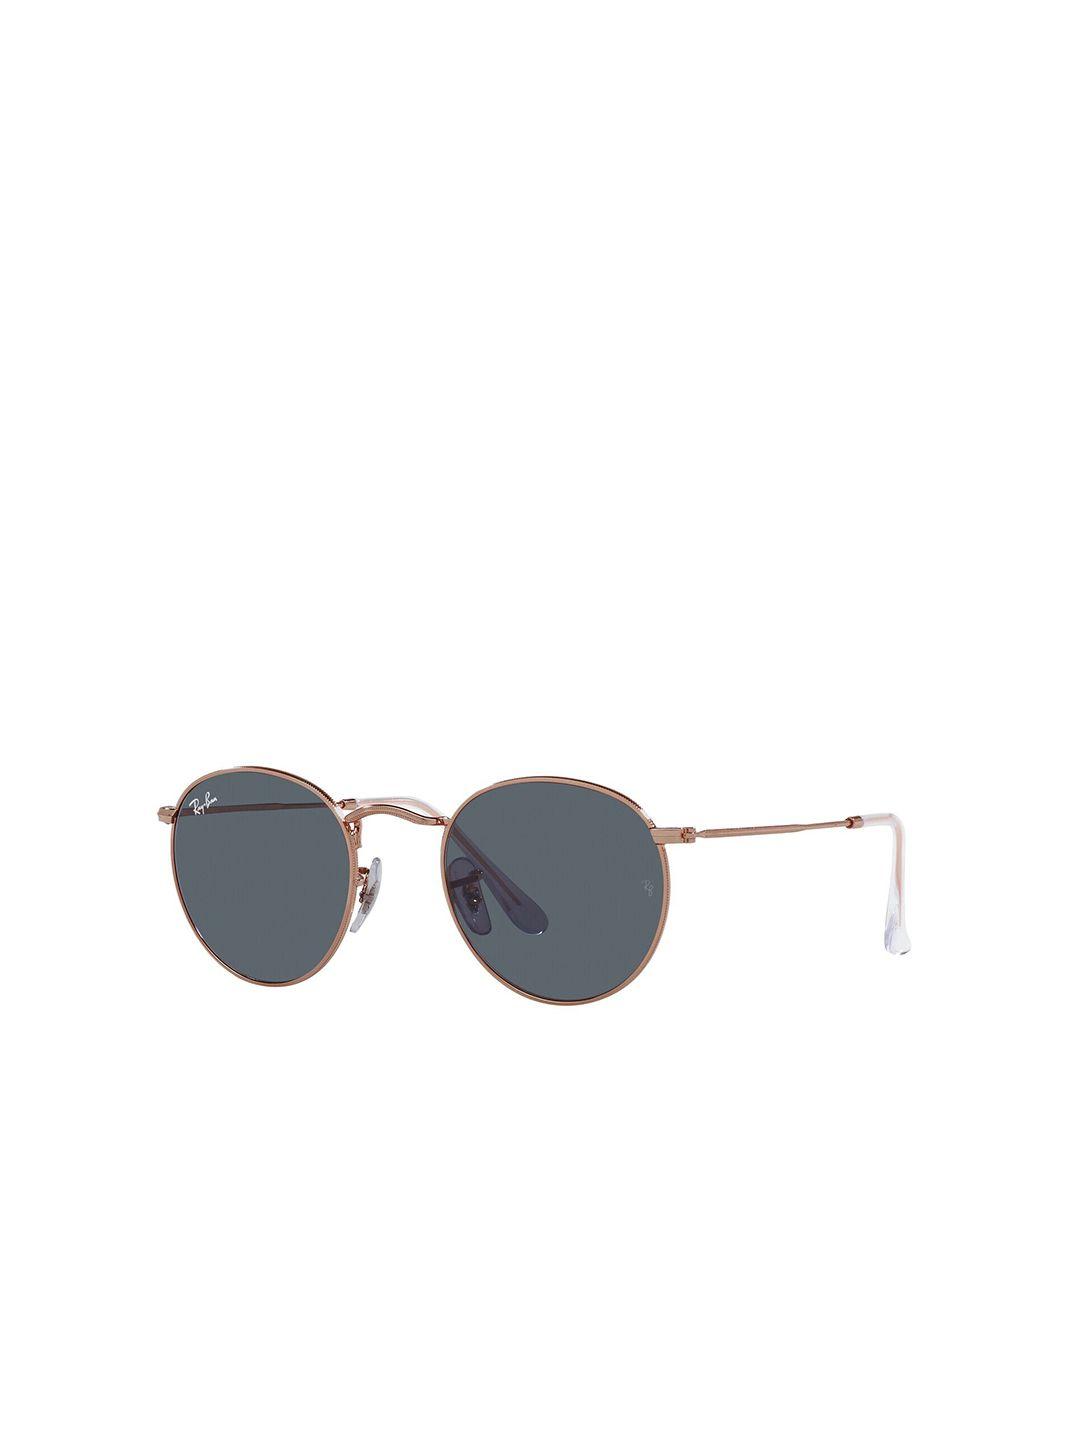 ray-ban men round sunglasses with uv protected lens 8056597858496-rose gold